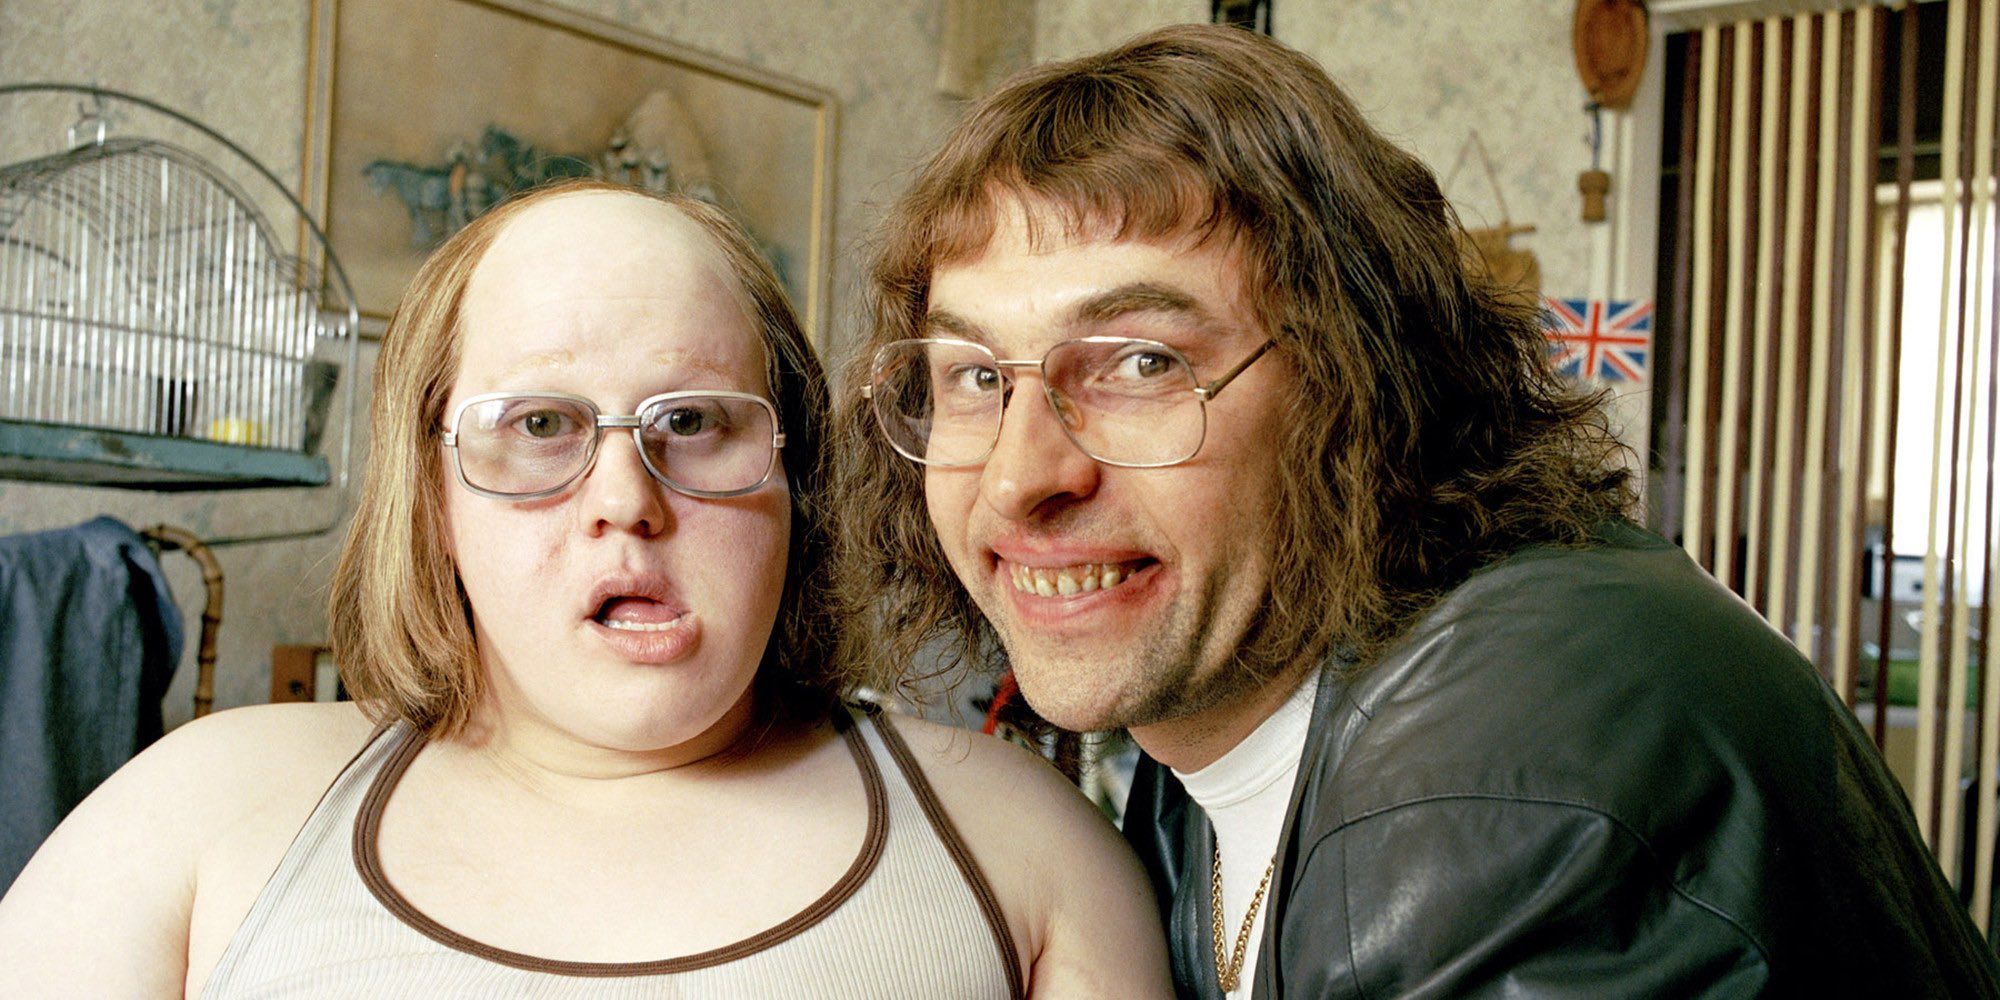 UK Sitcom Little Britain Removed From Streaming Due To Blackface